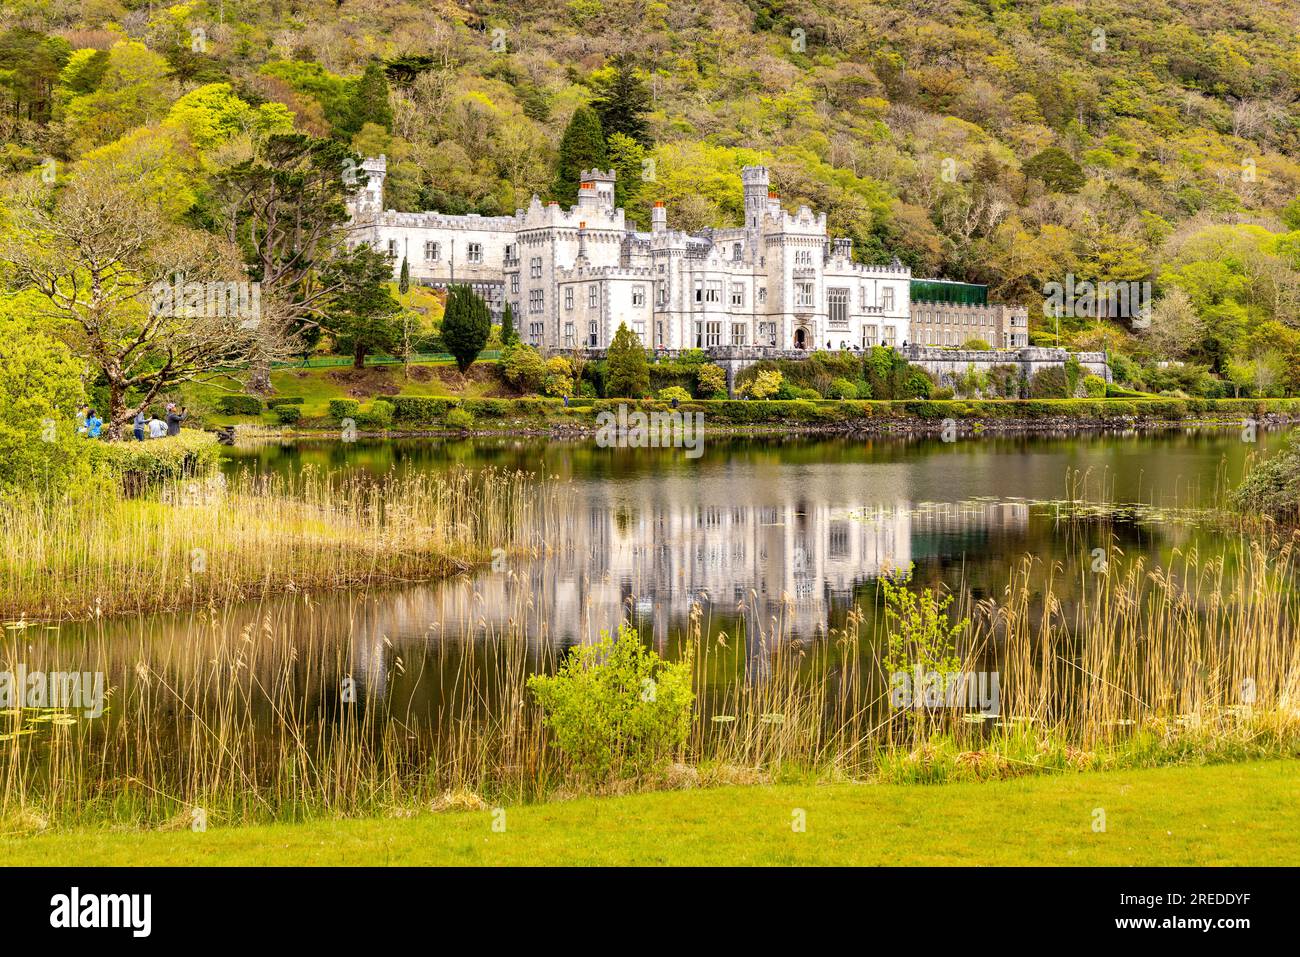 Kylemore Abbey, on the banks of Lough Pollacappul, Kylemore, Connemara, County Galway, Republic of Ireland. Stock Photo